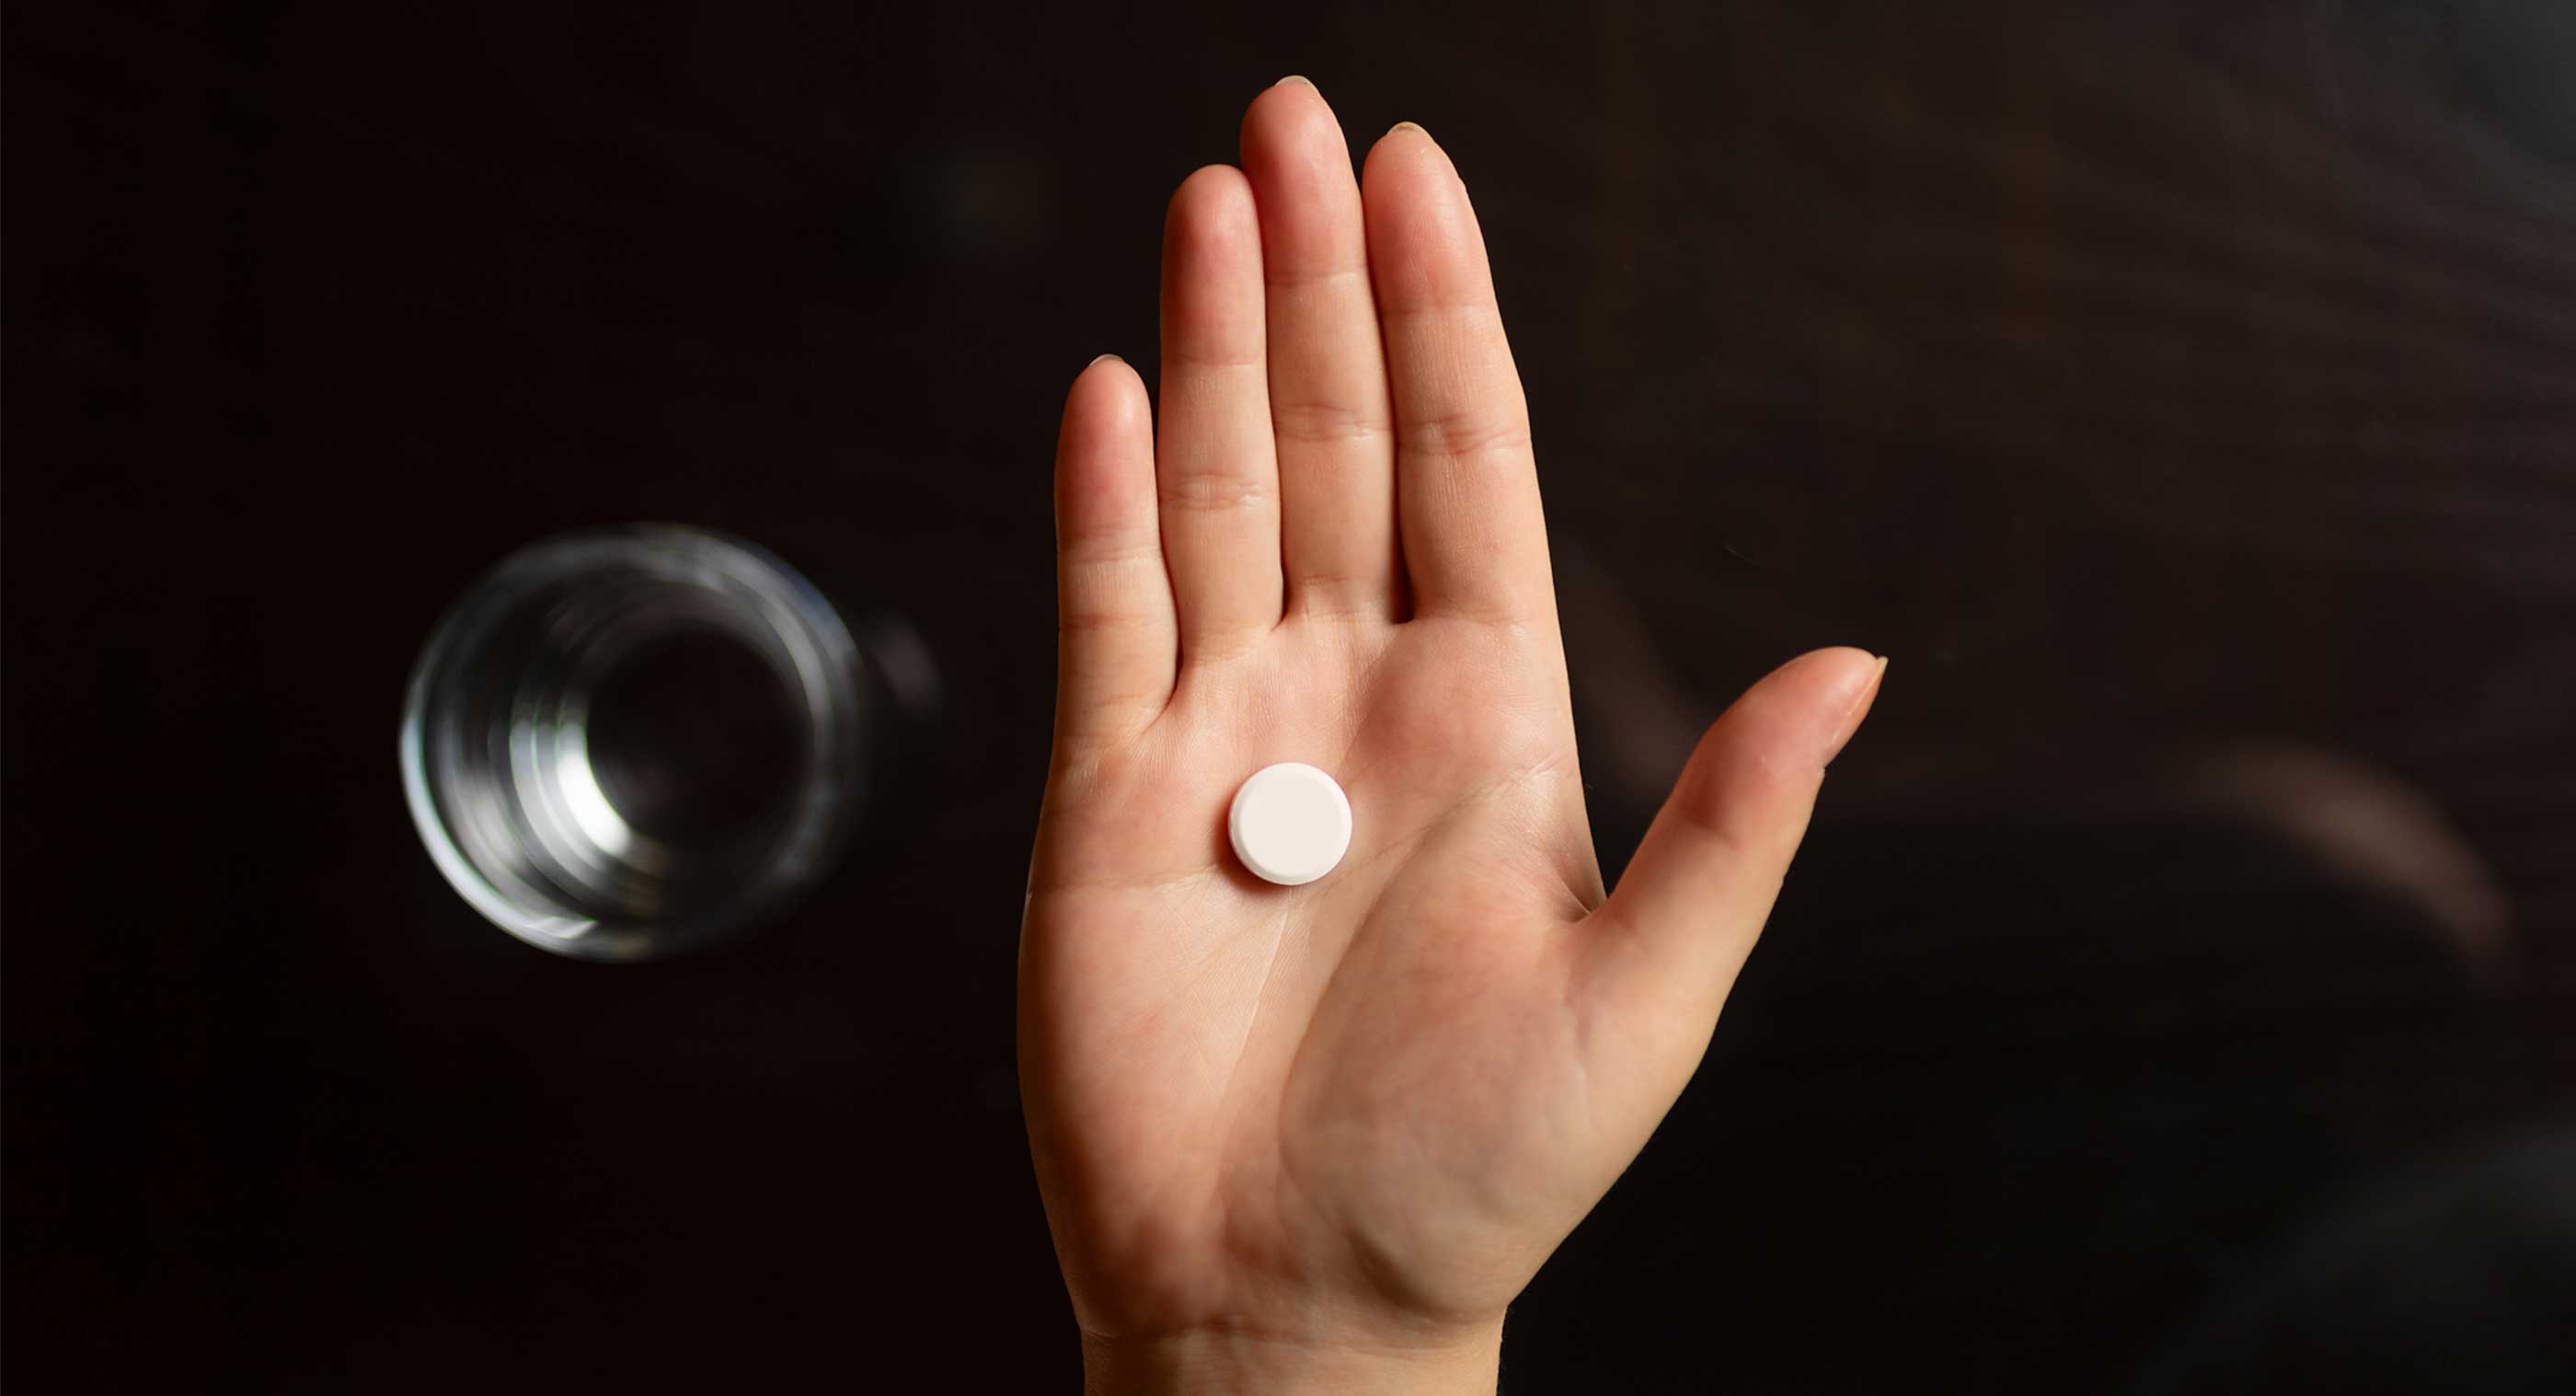 A woman's hand holds a single pill. On a table below the hand is a glass of water.